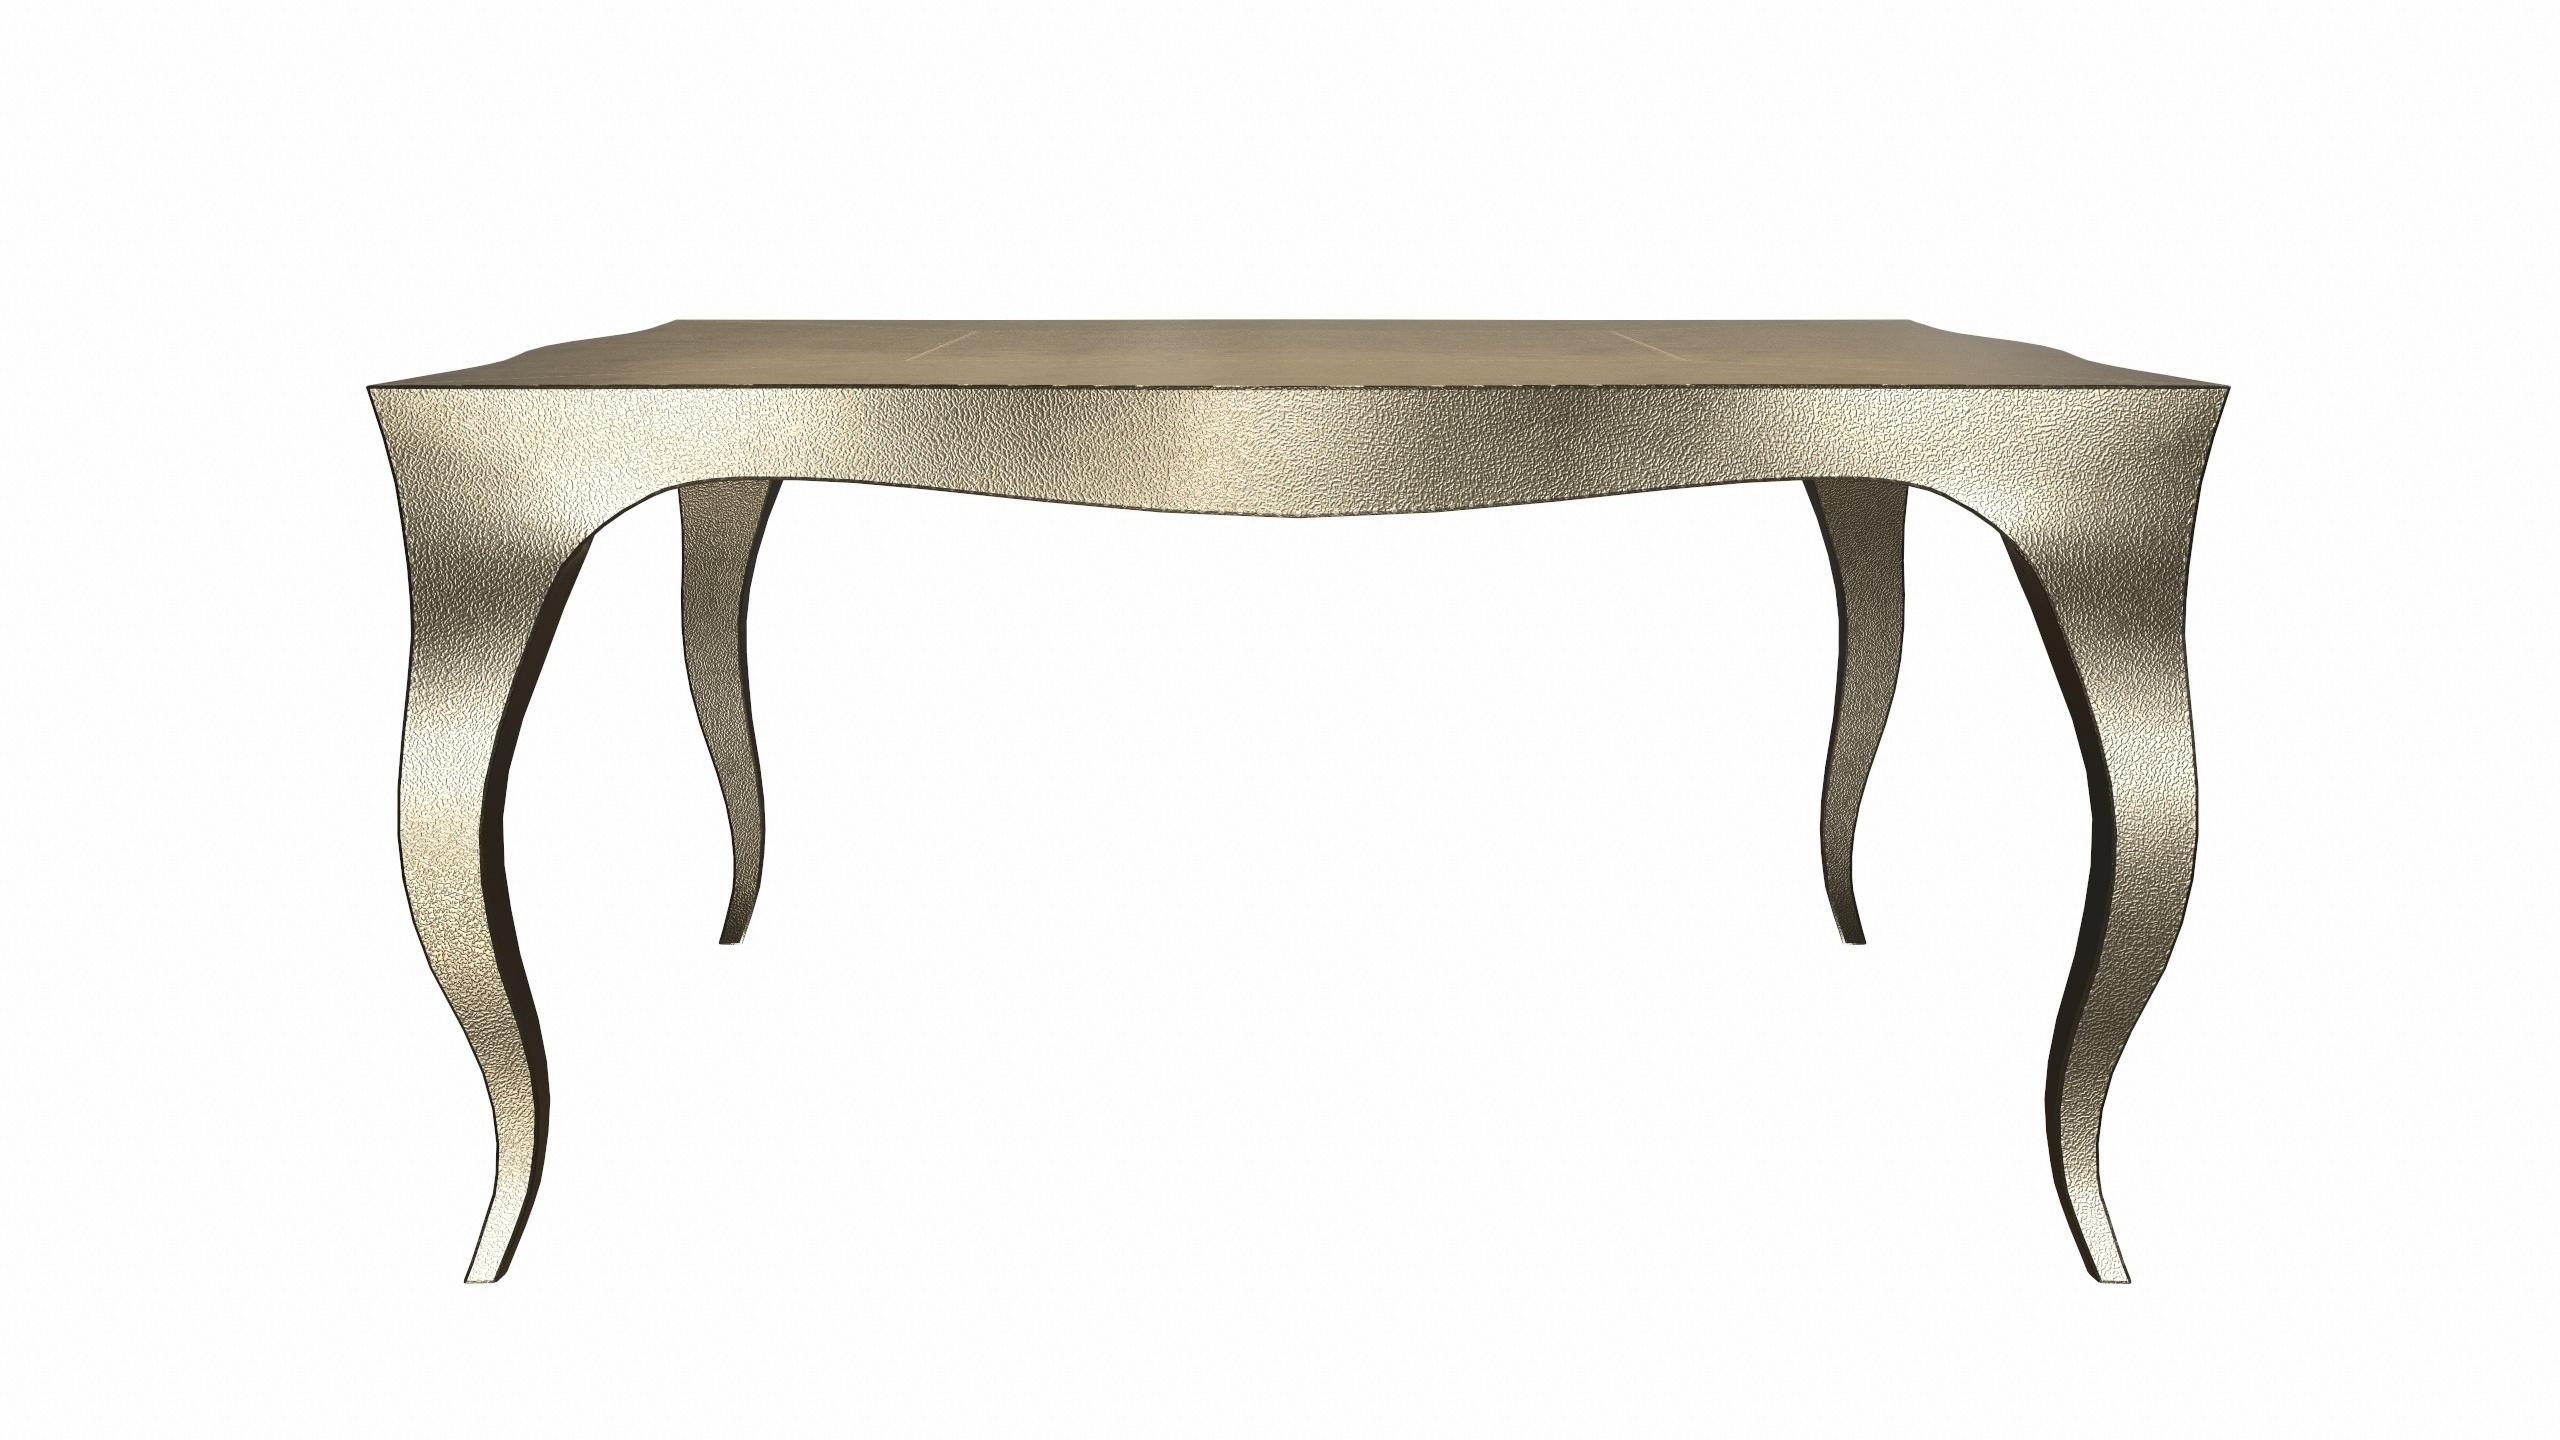 American Louise Art Deco Card Tables and Tea Tables Fine Hammered Brass by Paul Mathieu For Sale